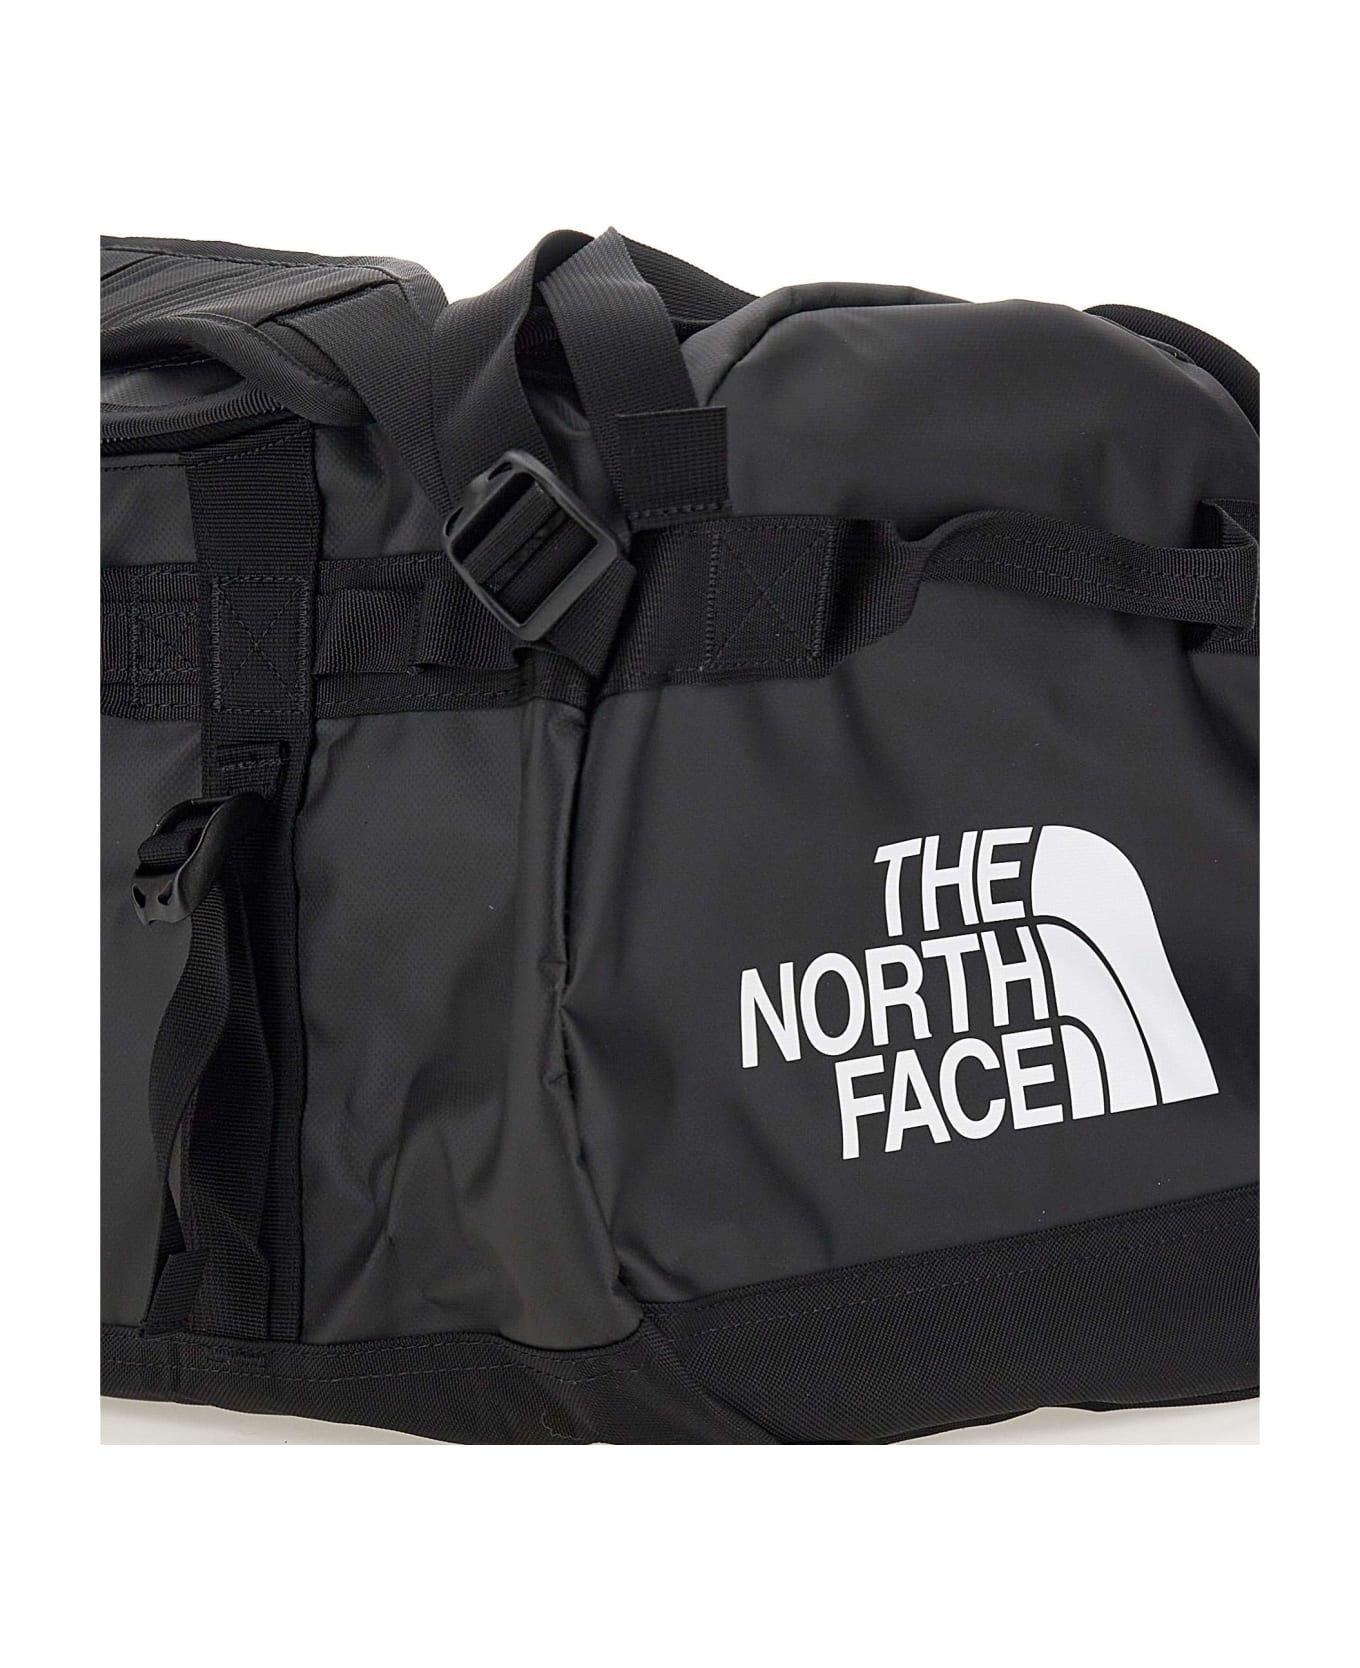 The North Face "base Camp Duffel" Bag - BLACK/WHITE